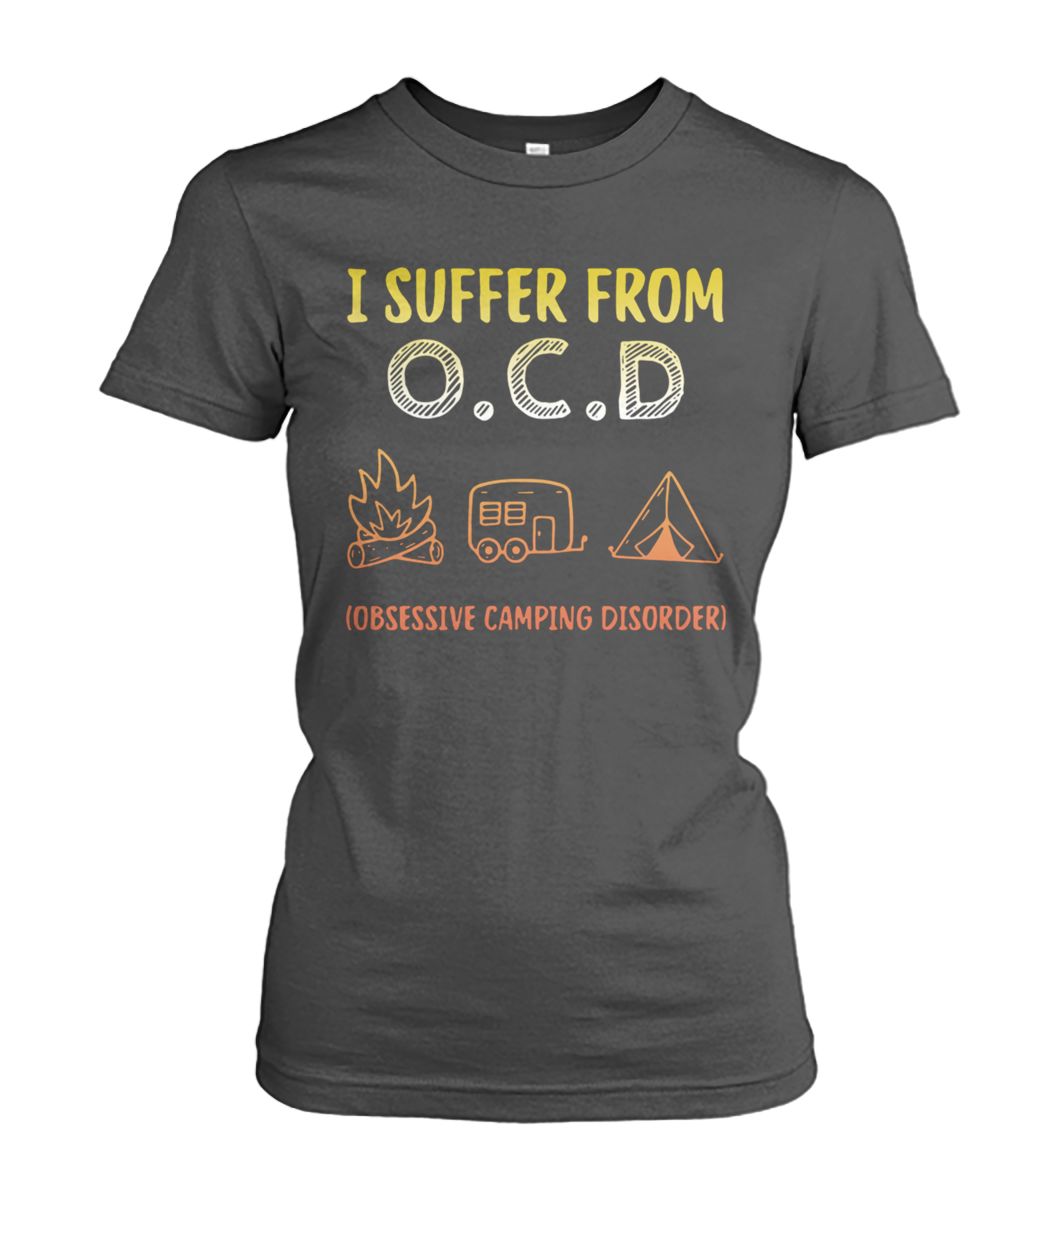 I suffer from OCD obsessive camping disorder women's crew tee